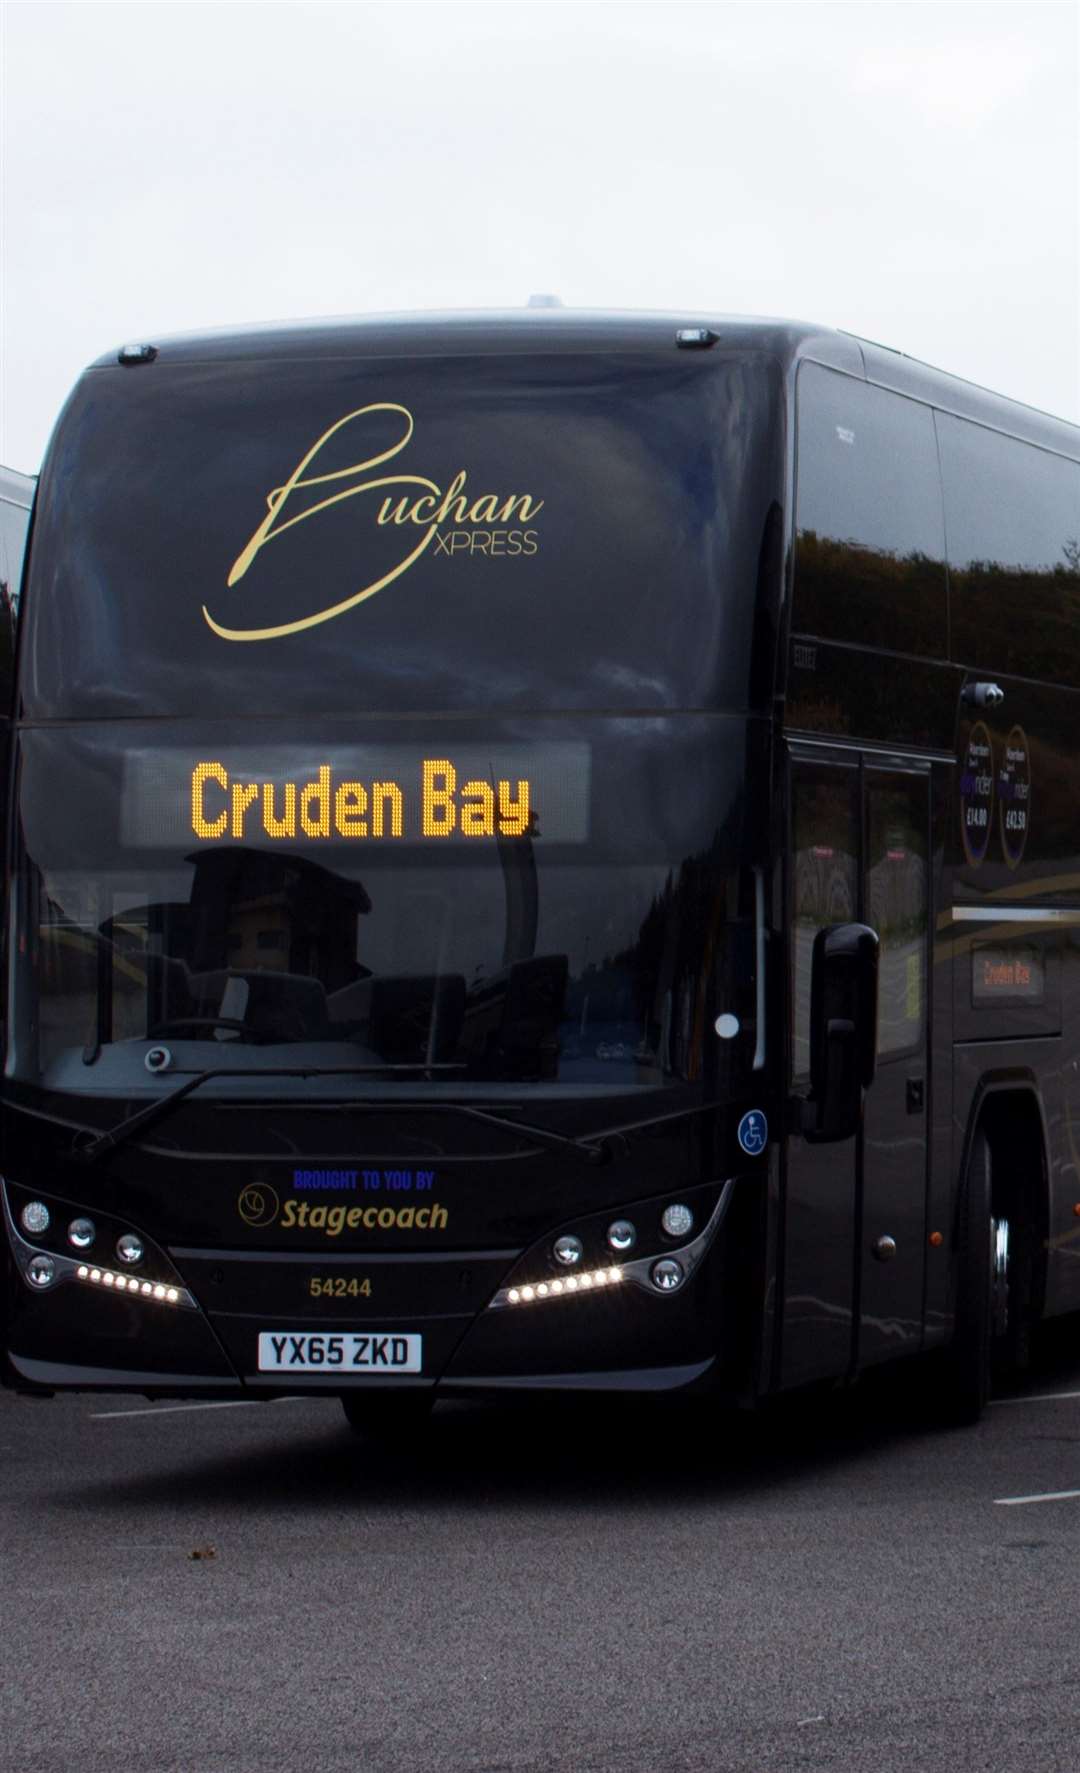 Councillor Stephen Smith has called for services between Cruden Bay and Peterhead to be reinstated.